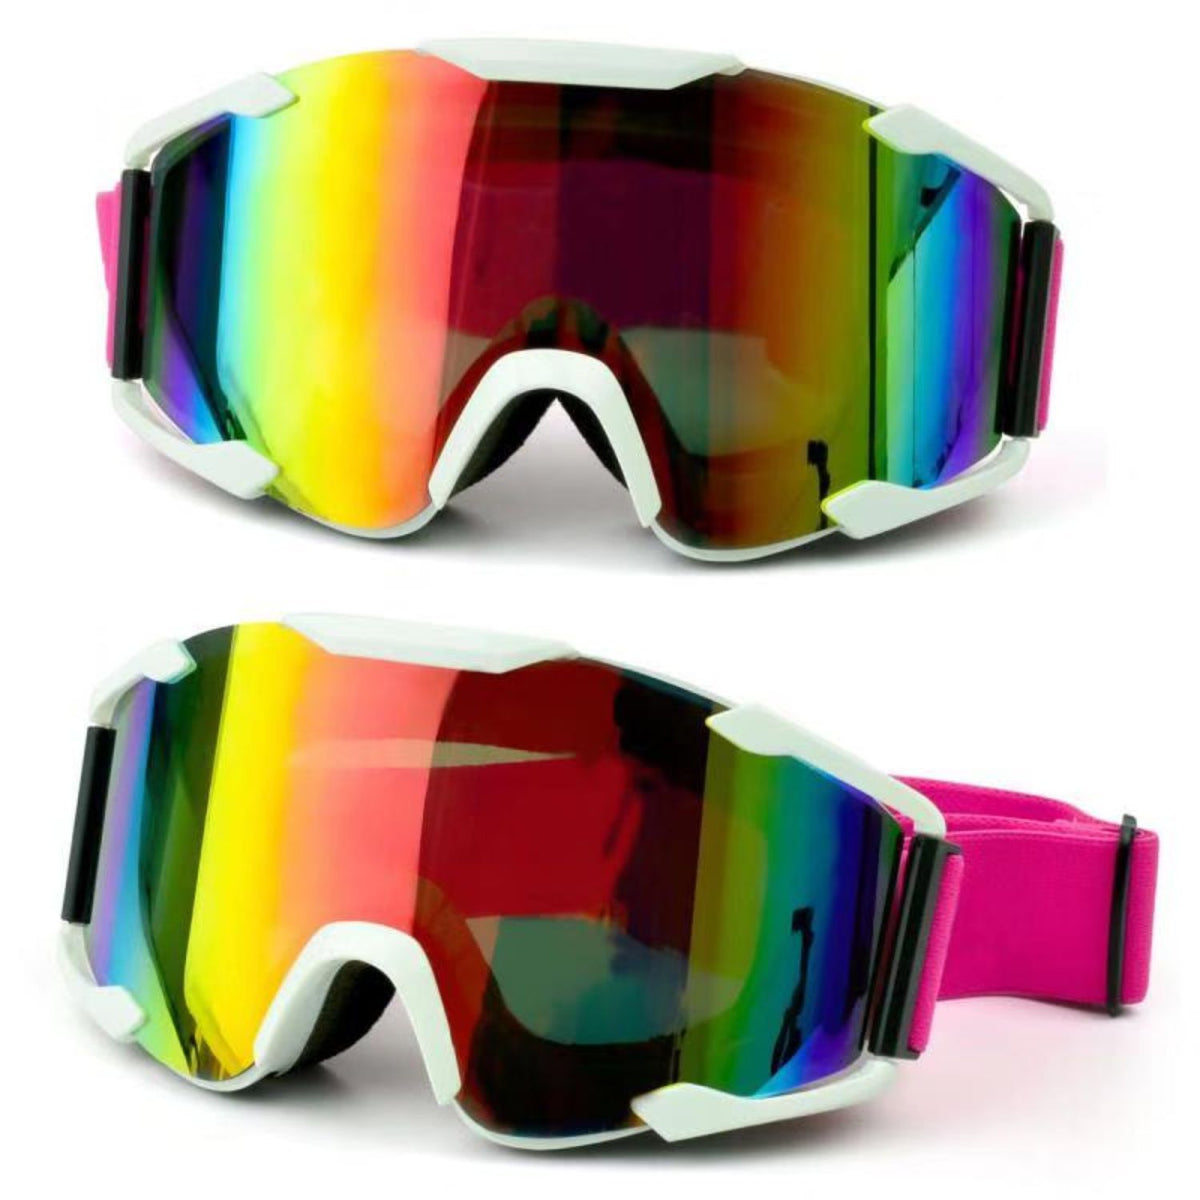 SG05 - Ski Snowboard Goggles for Men and Women with UV Protection - Iris Fashion Inc. | Wholesale Sunglasses and Glasses